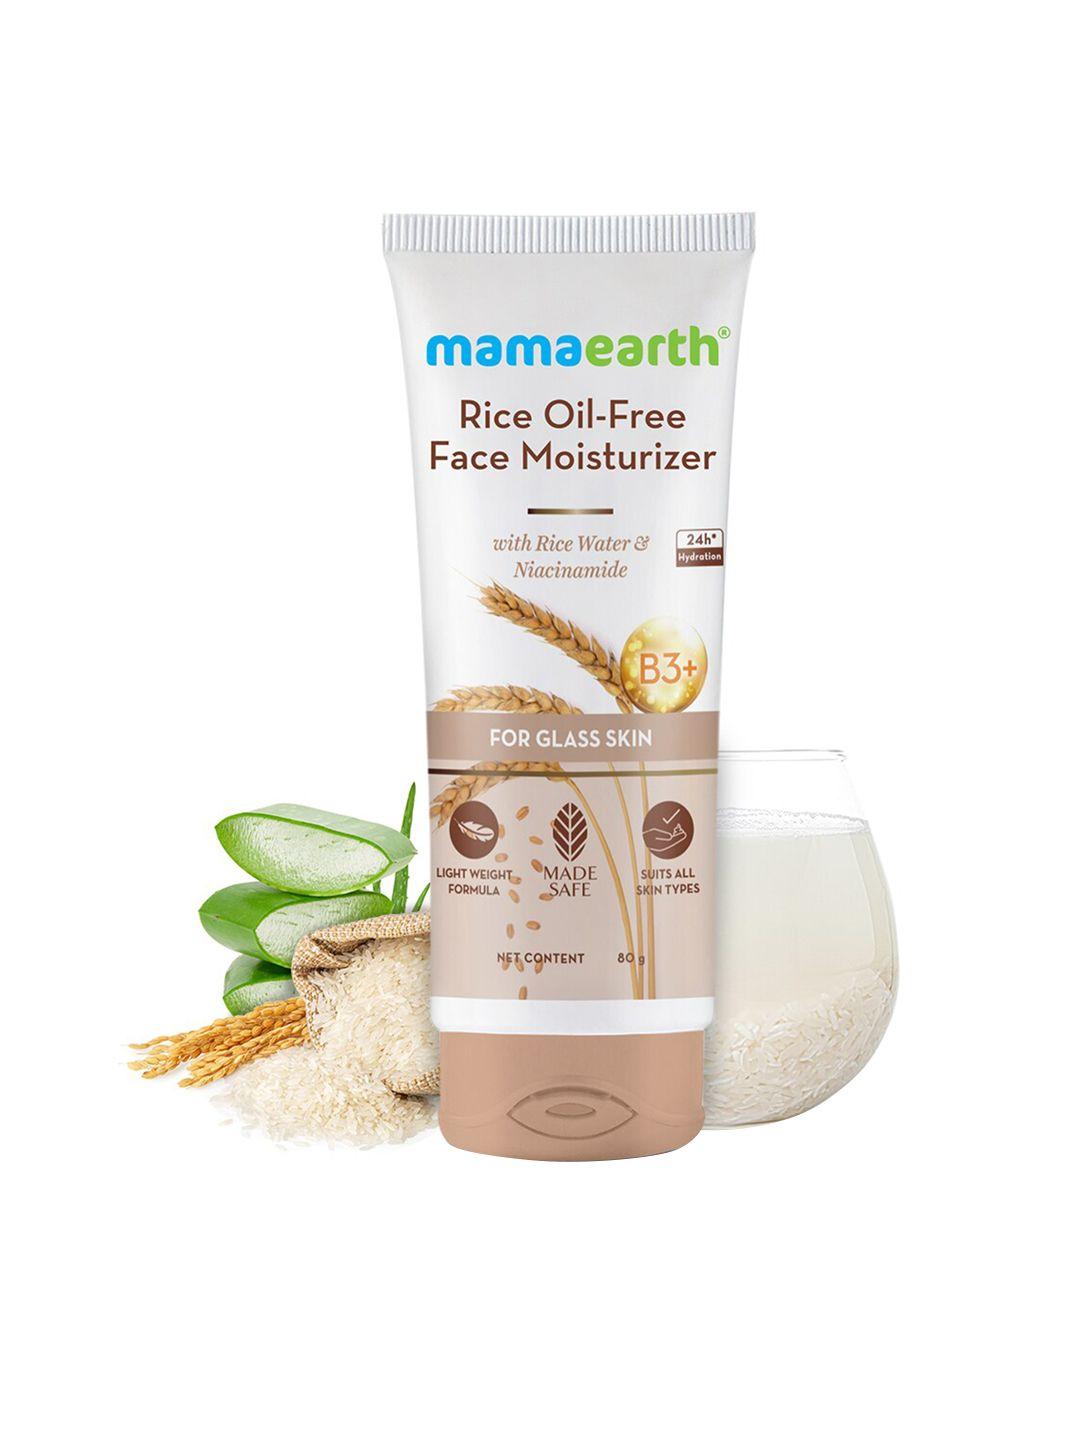 mamaearth rice oil-free face moisturizer with rice water & niacinamide 80 g